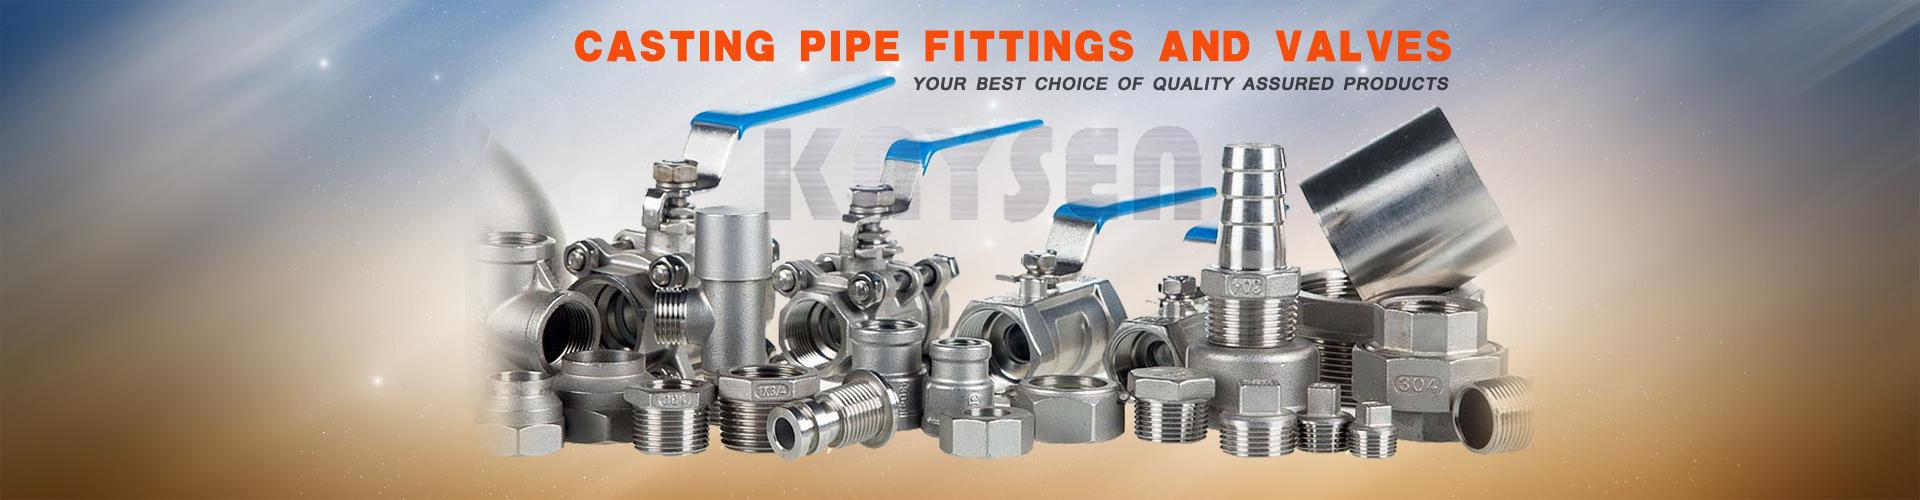 Casting Pipe fitting